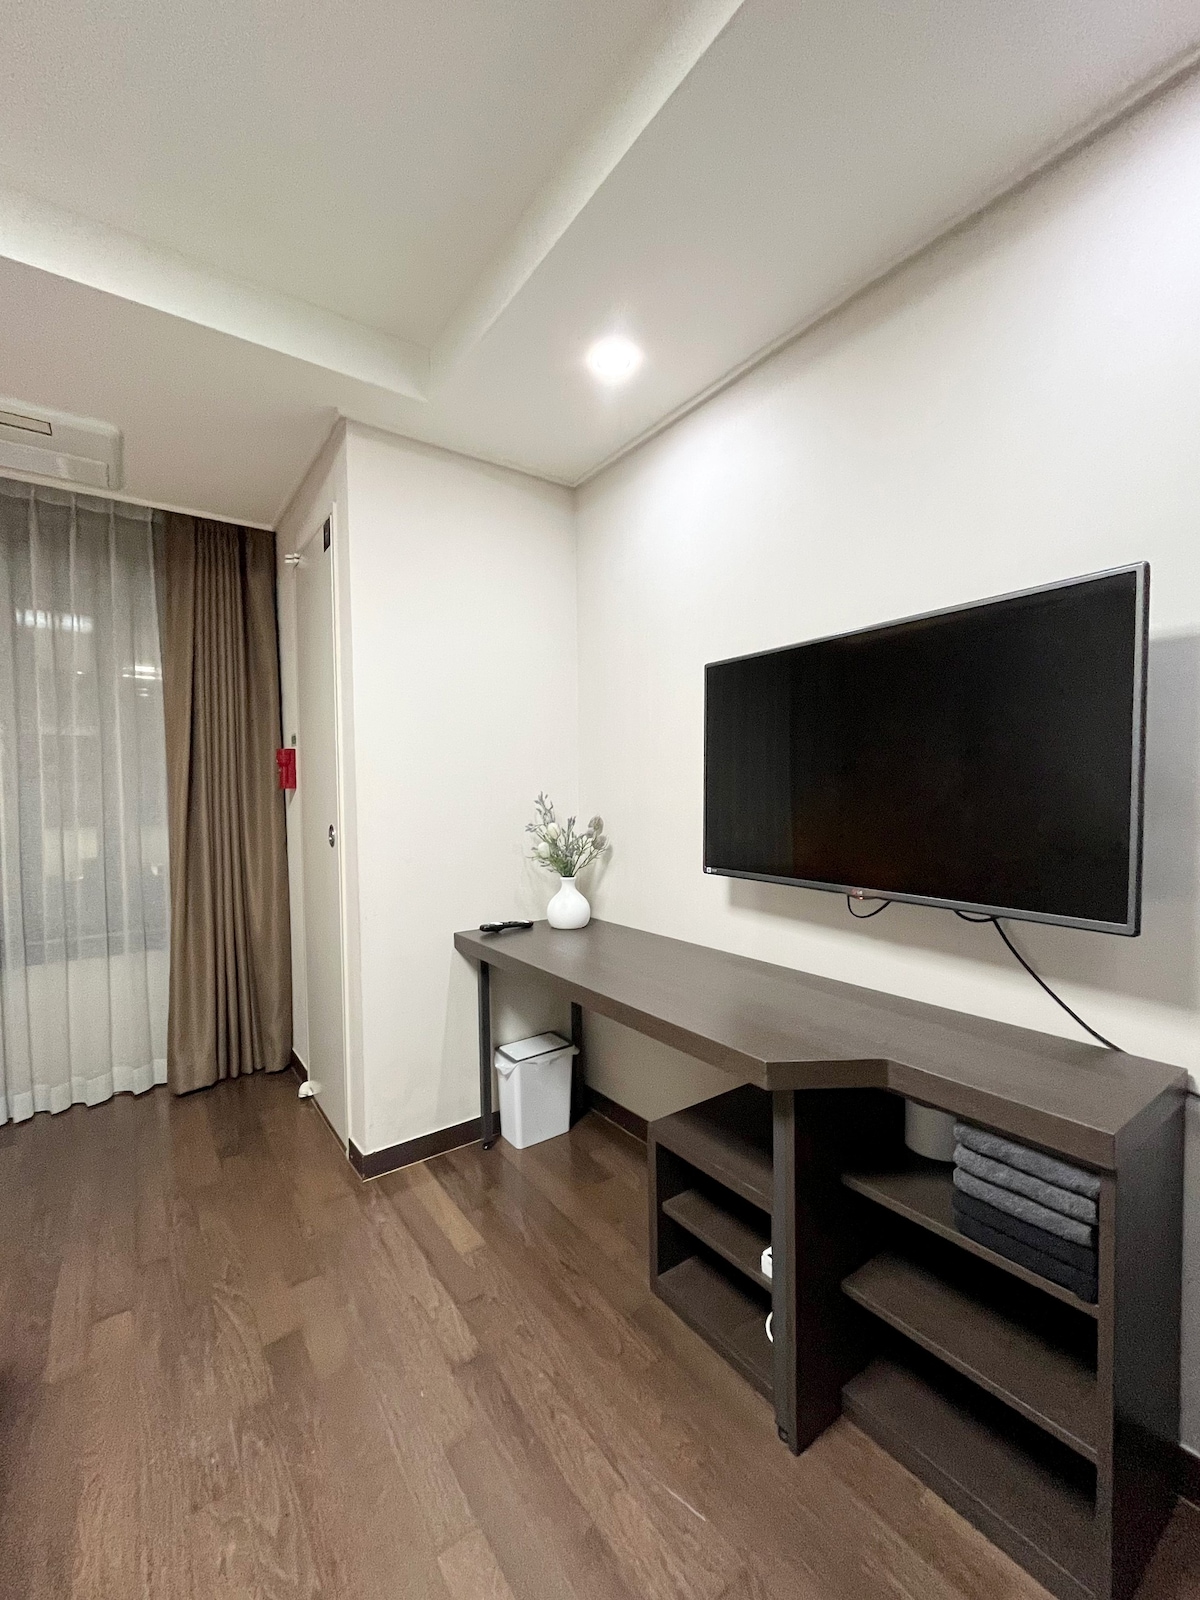 (Open Discount) Tranquil house in Gangnam